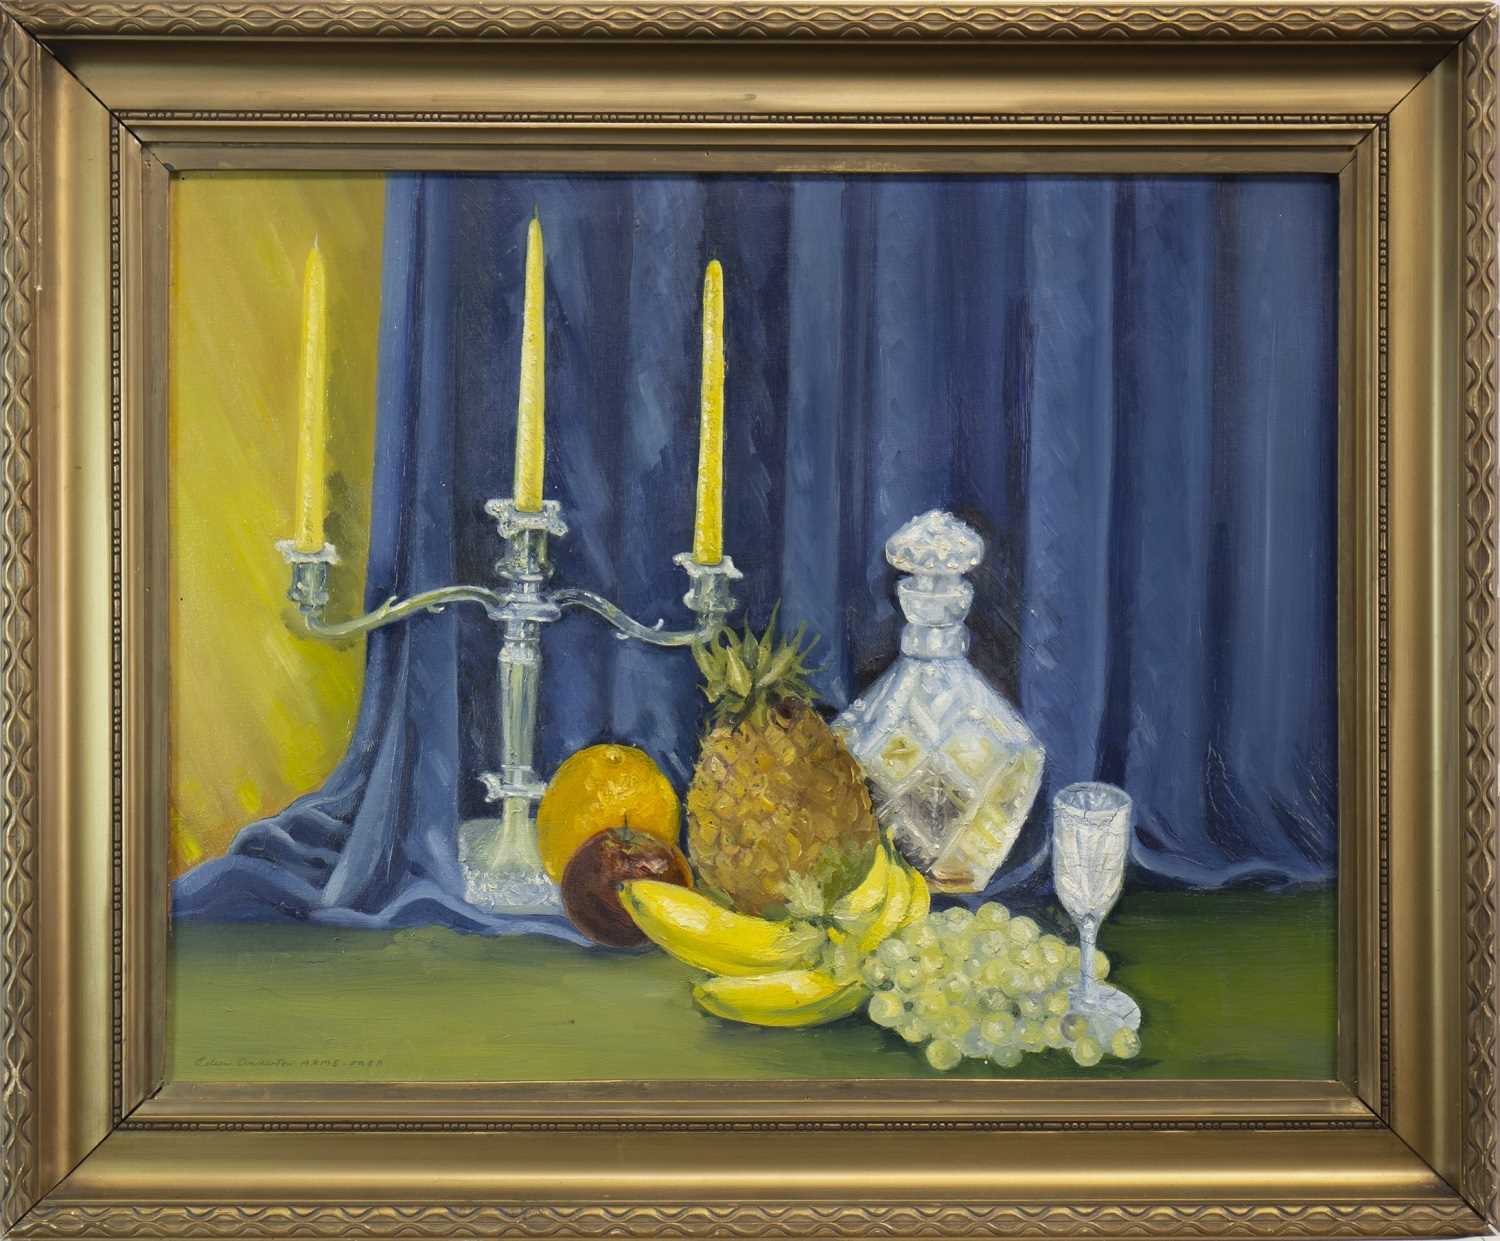 Lot 645 - STILL LIFE, AN OIL BY EILEEN ANDERSON